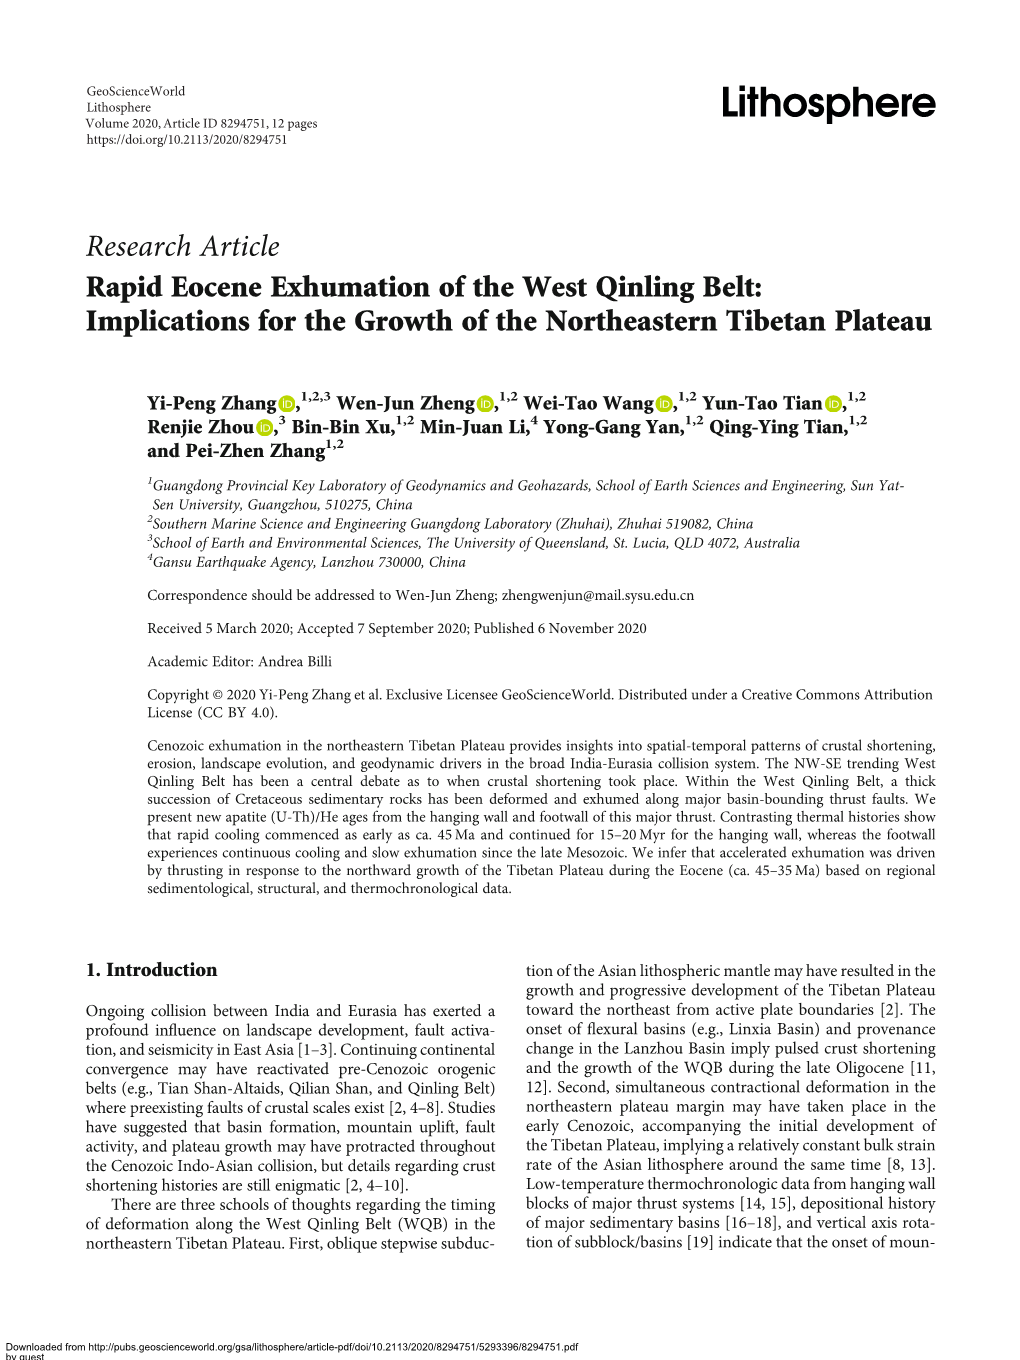 Research Article Rapid Eocene Exhumation of the West Qinling Belt: Implications for the Growth of the Northeastern Tibetan Plateau